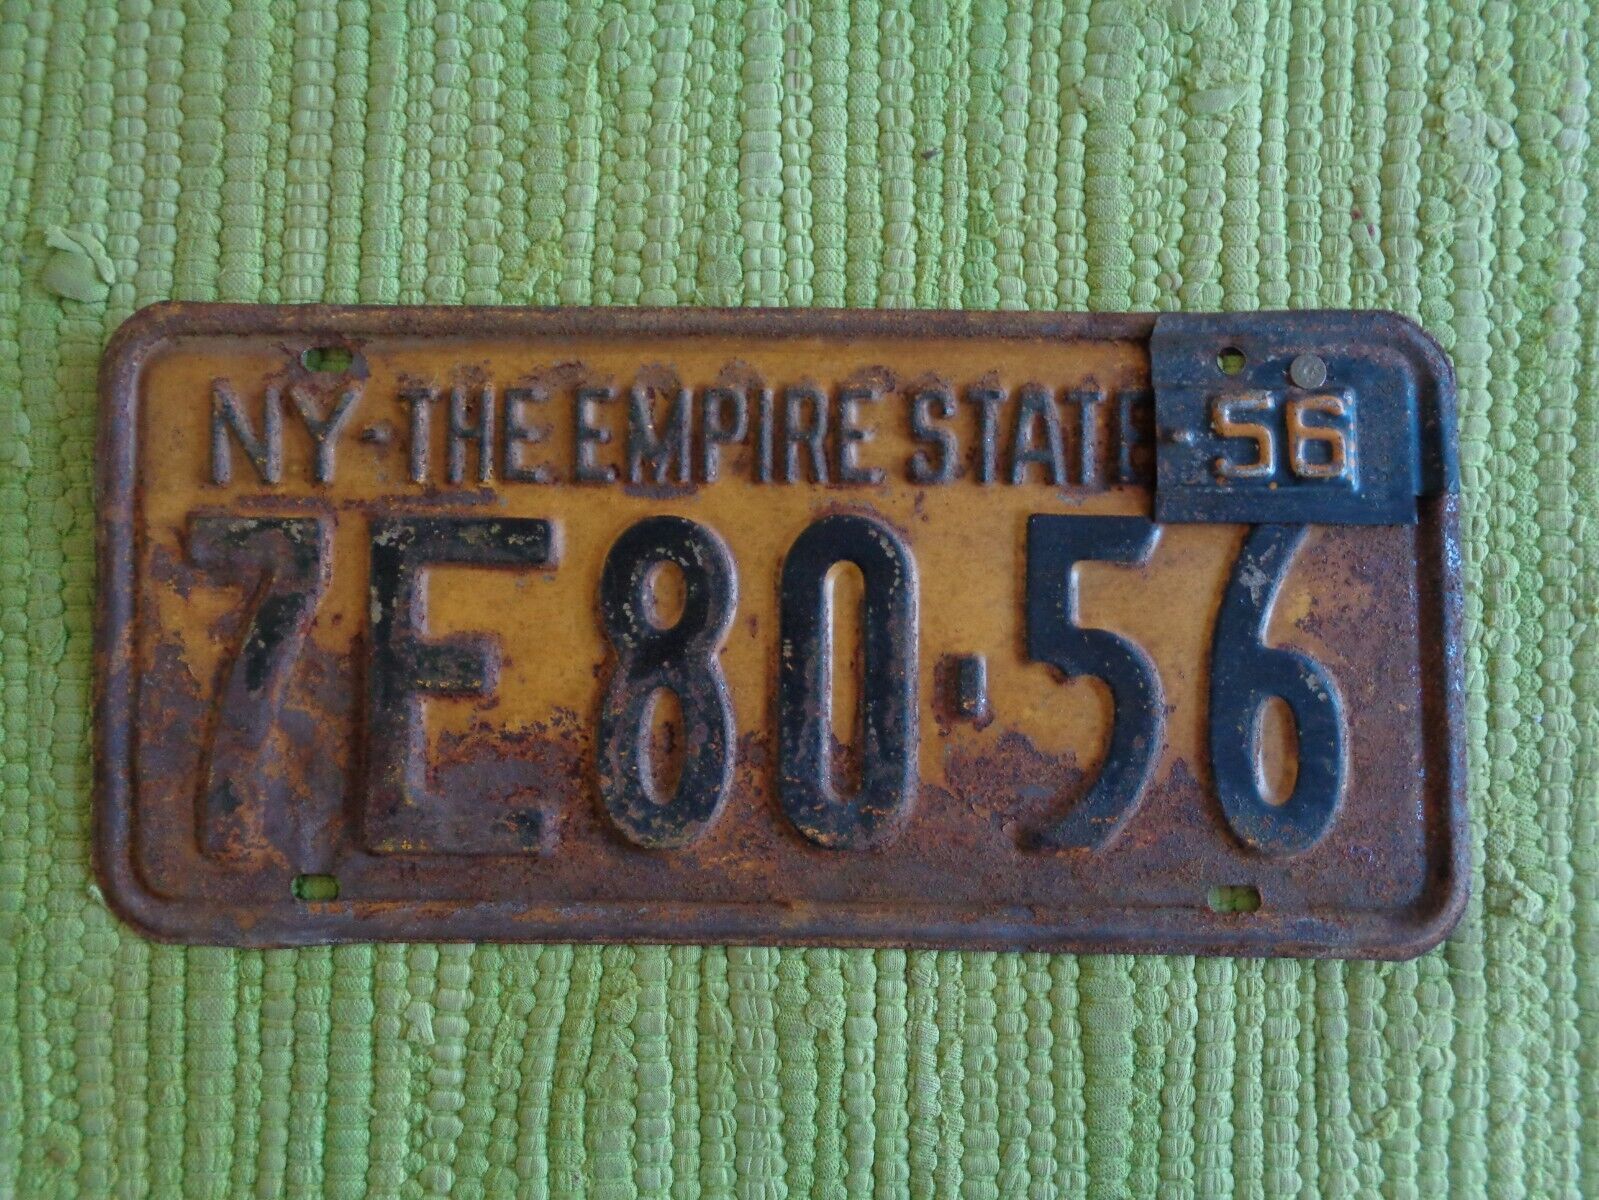 1955 w/ 56 Tab New York License Plate 55 1956 NY Tag Empire State 7E80-56